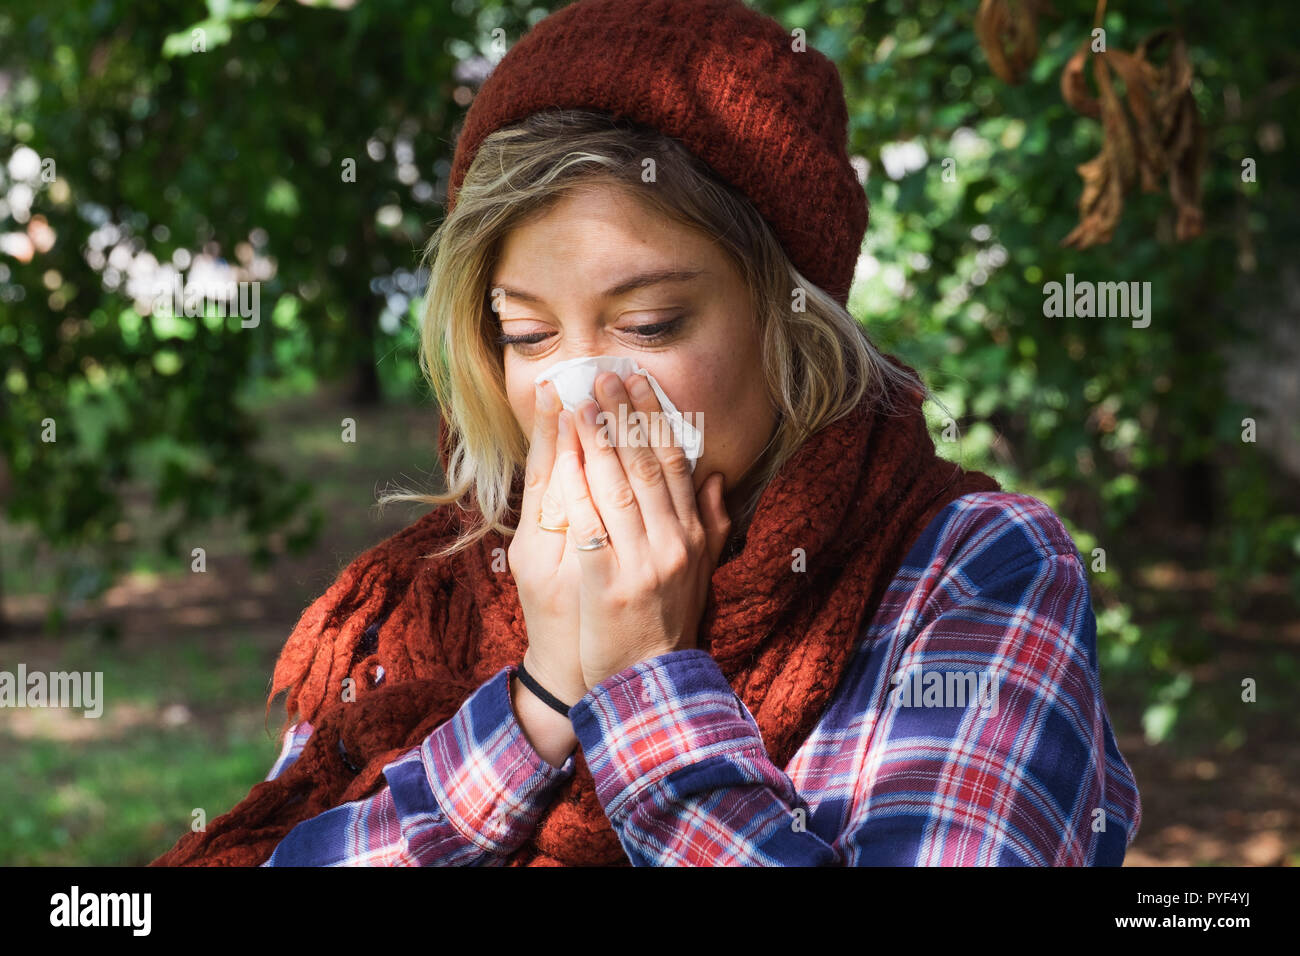 Woman portrait outdoor sneezing because cold and flu Stock Photo